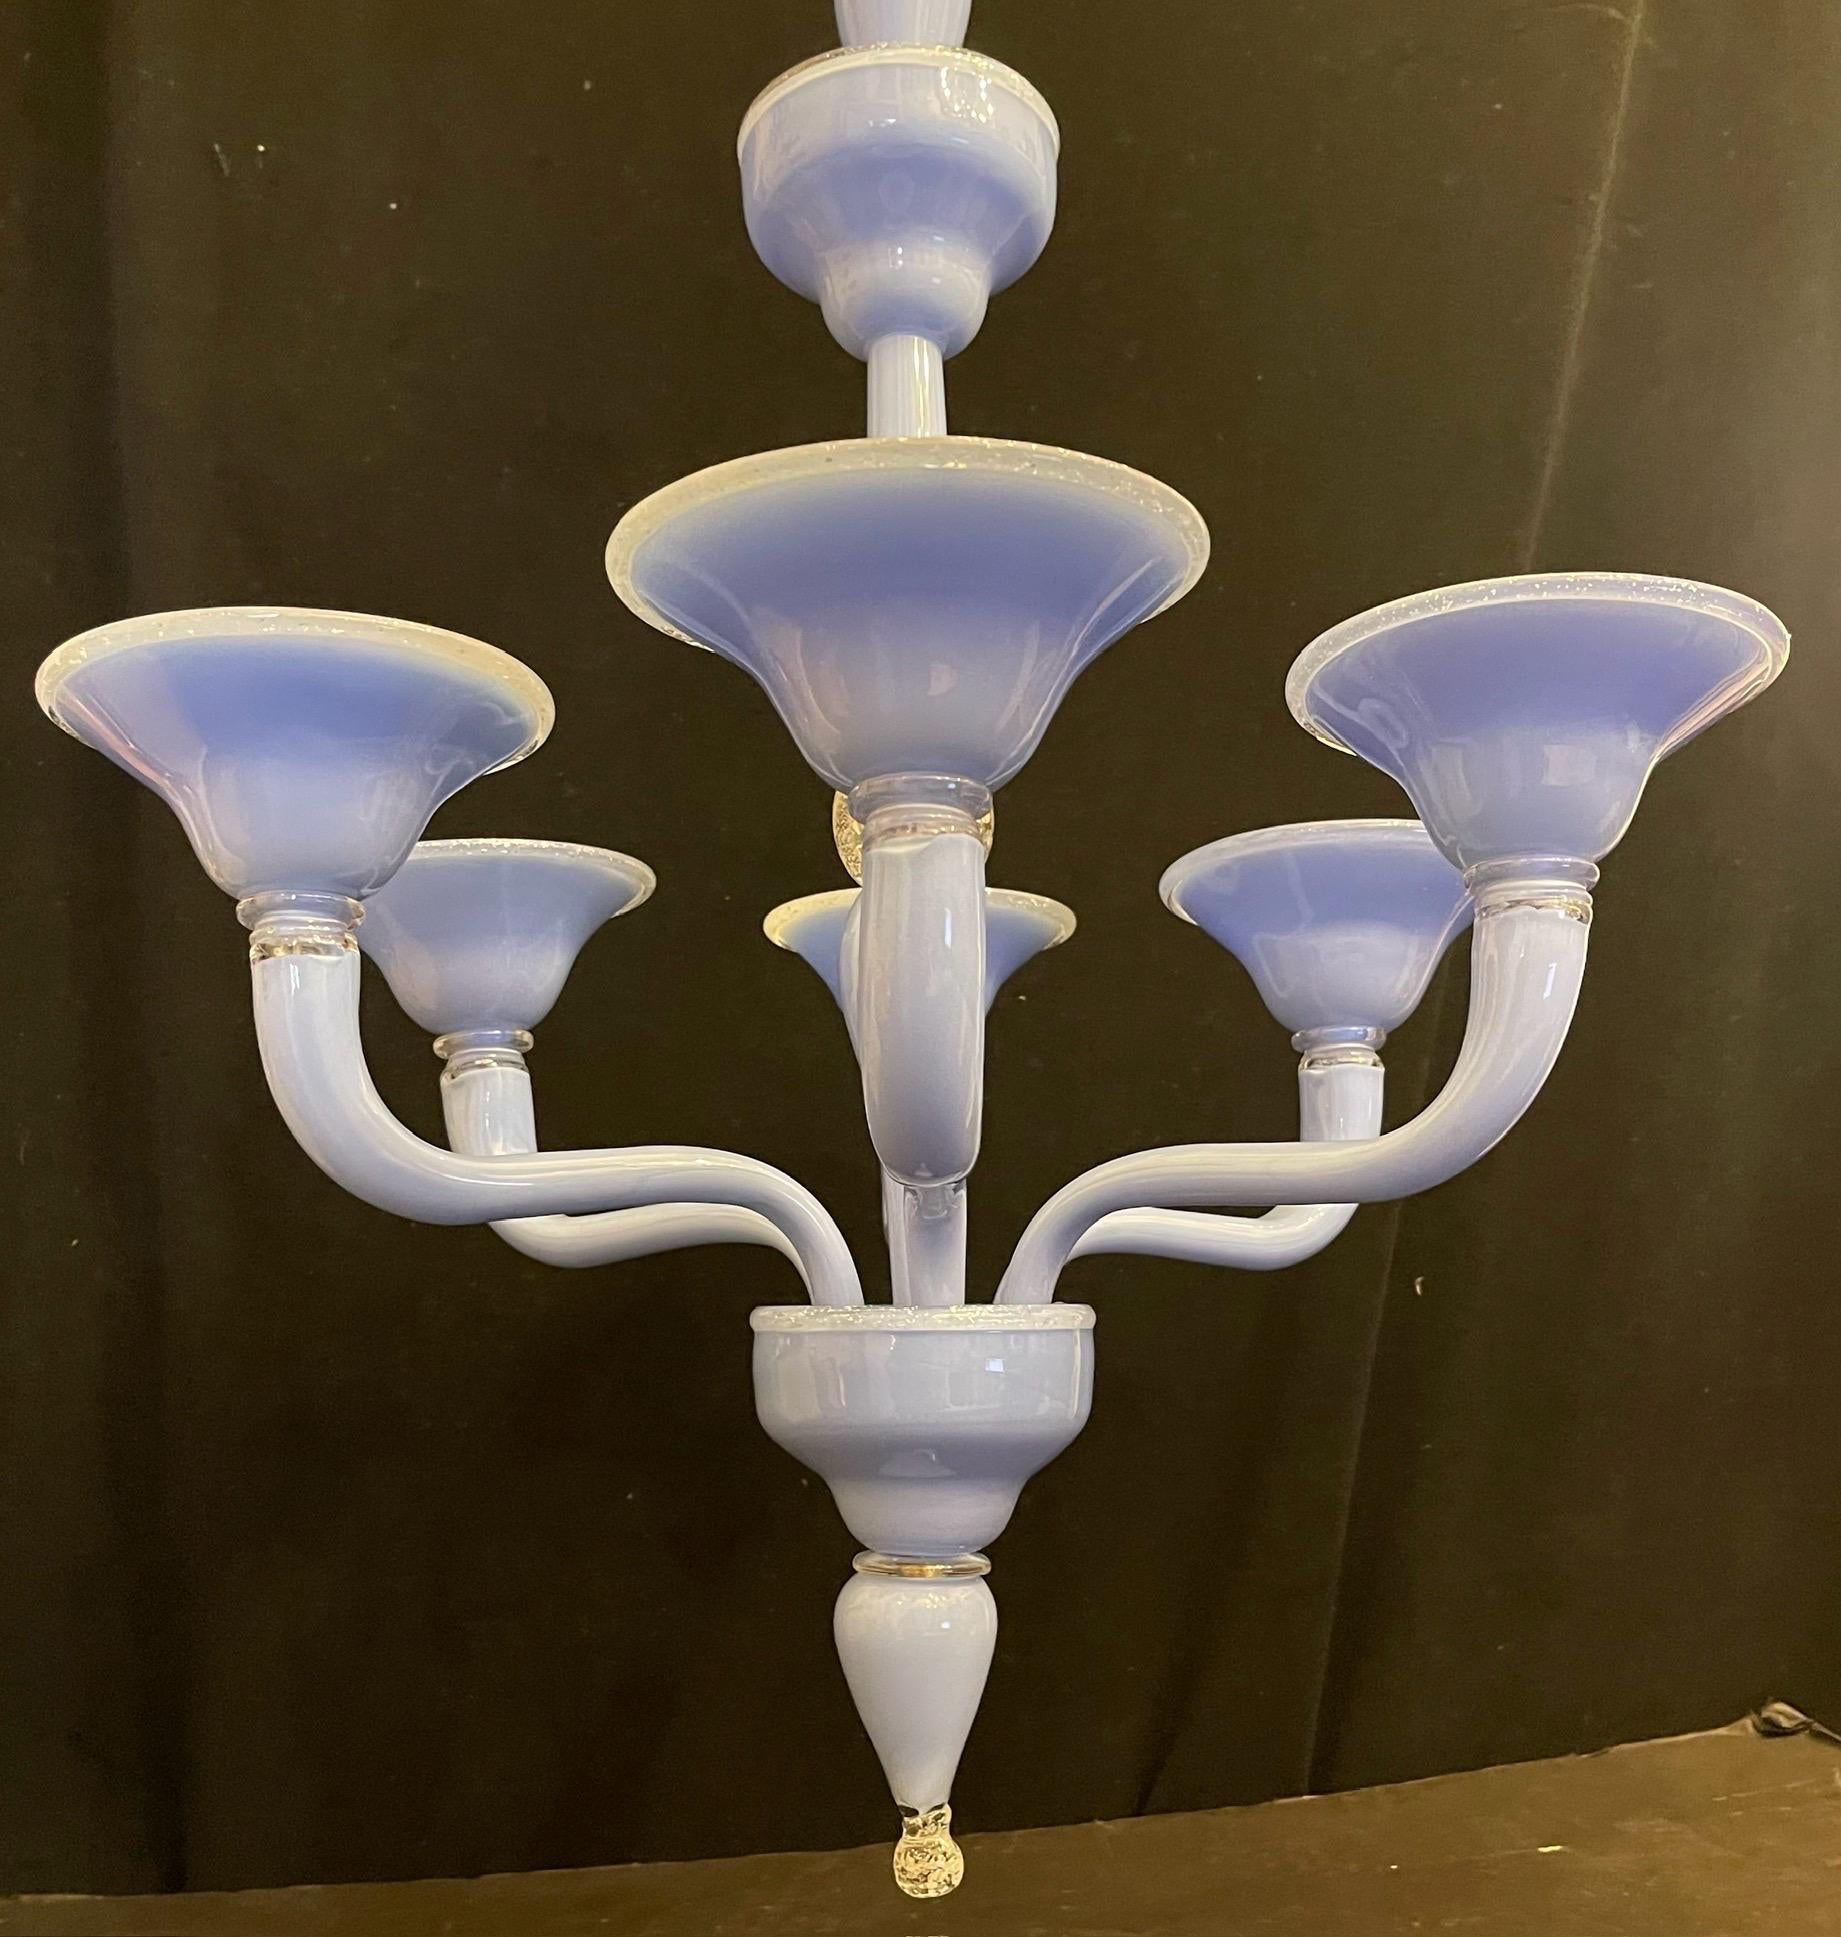 Wonderful Mid Century Modern Murano 6 Candelabra Light Pale Blue / Lavender With Clear And Gold Flake Accent Chandelier In The Style & Manner Of Barovier Seguso & Ferro.